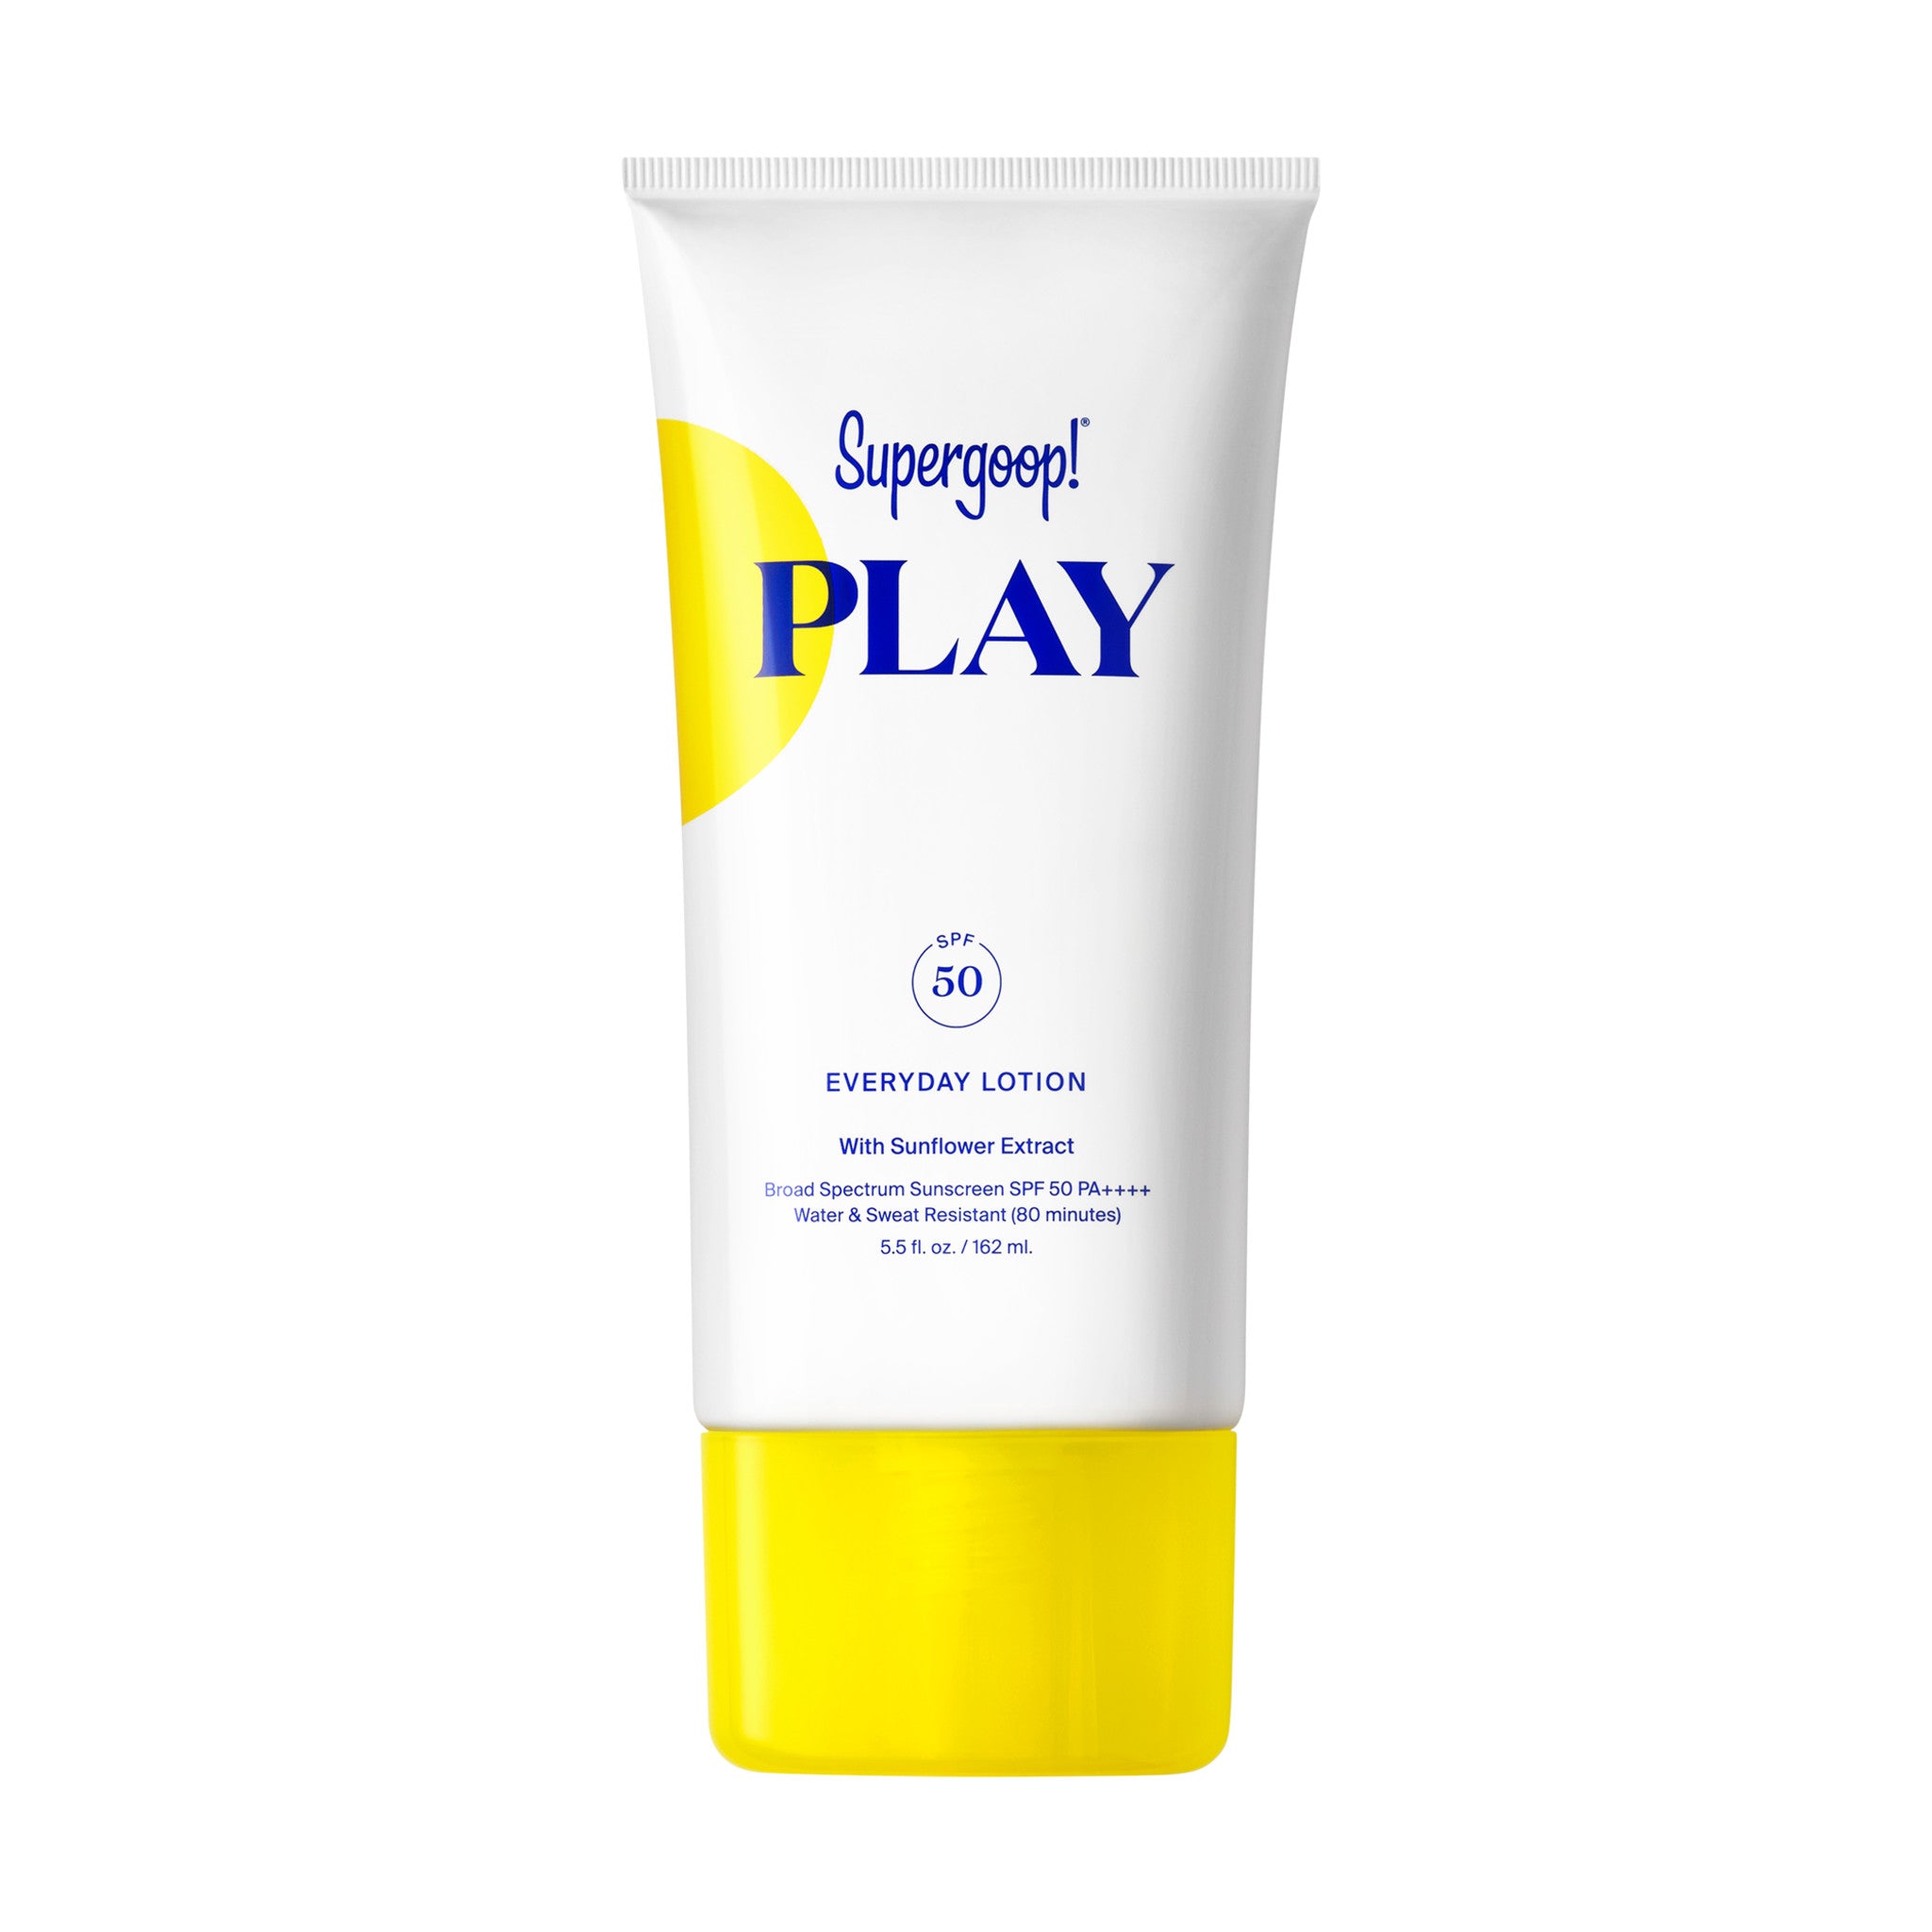 Supergoop! Play Everyday Lotion With Sunflower Extract SPF 50 Size variant: 5.5 oz main image.